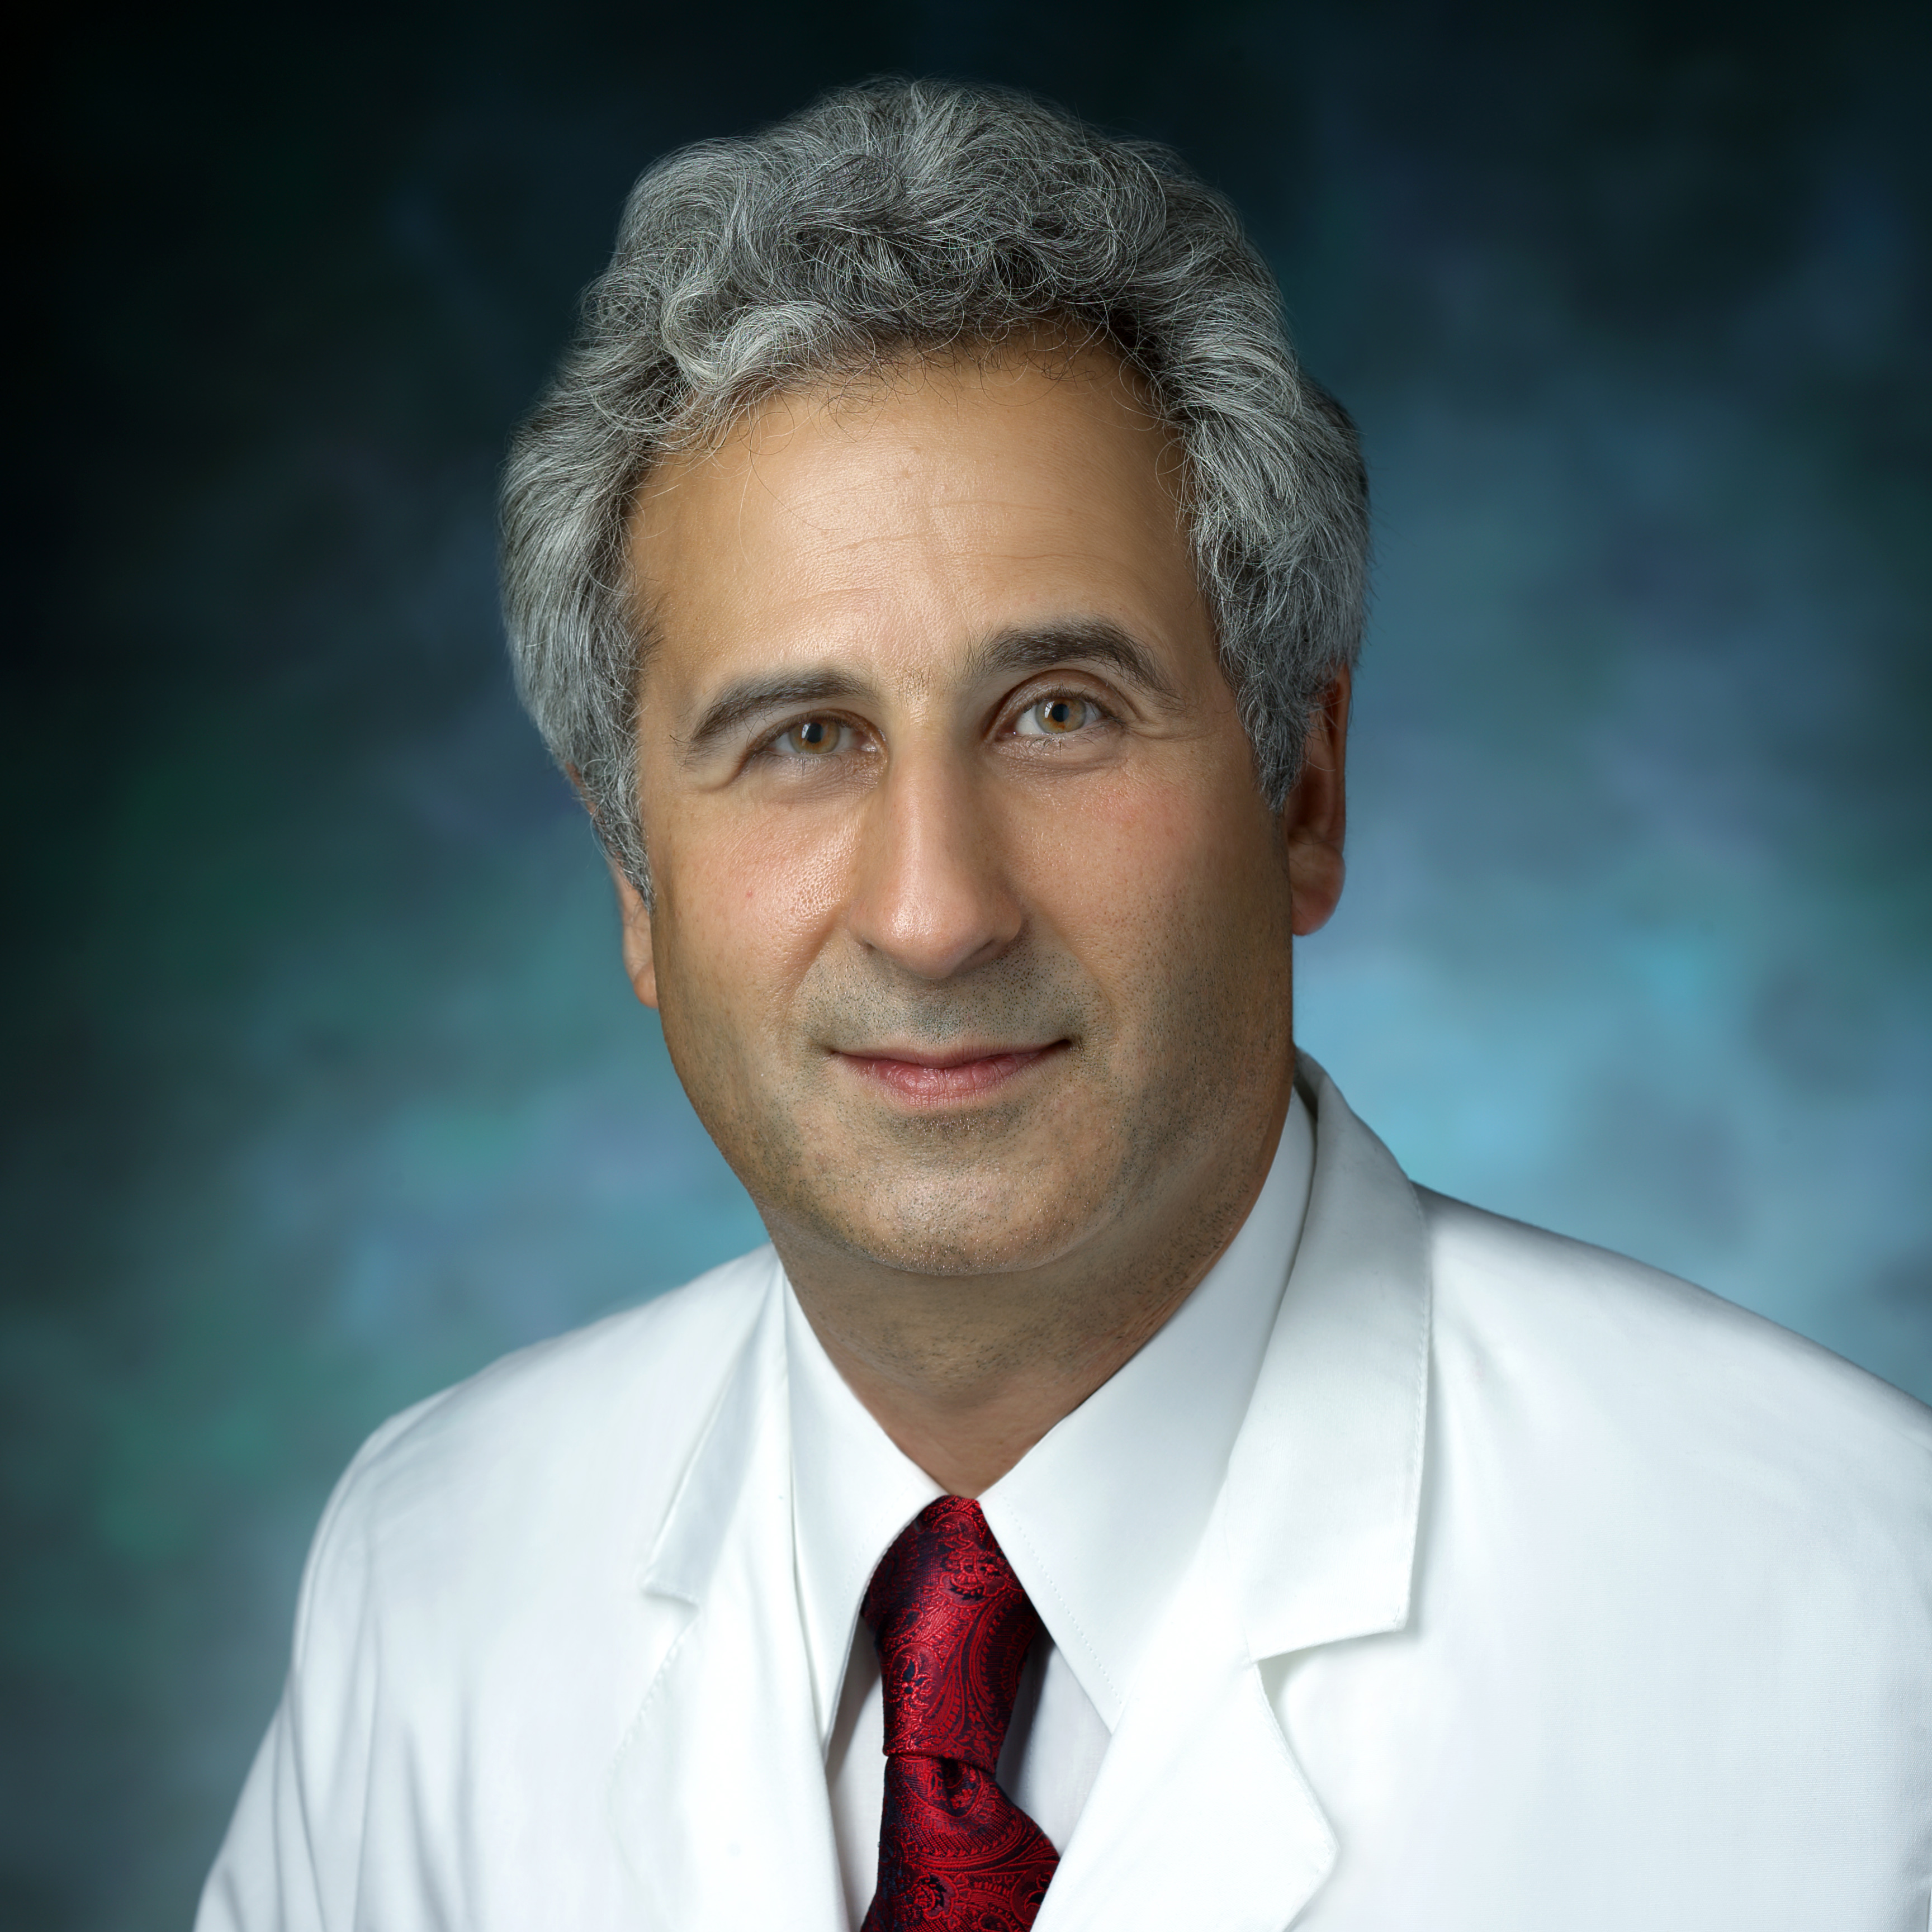 Ahmet Baschat, in a formal portrait, wearing a white lab coat, white button down shirt and red tie.